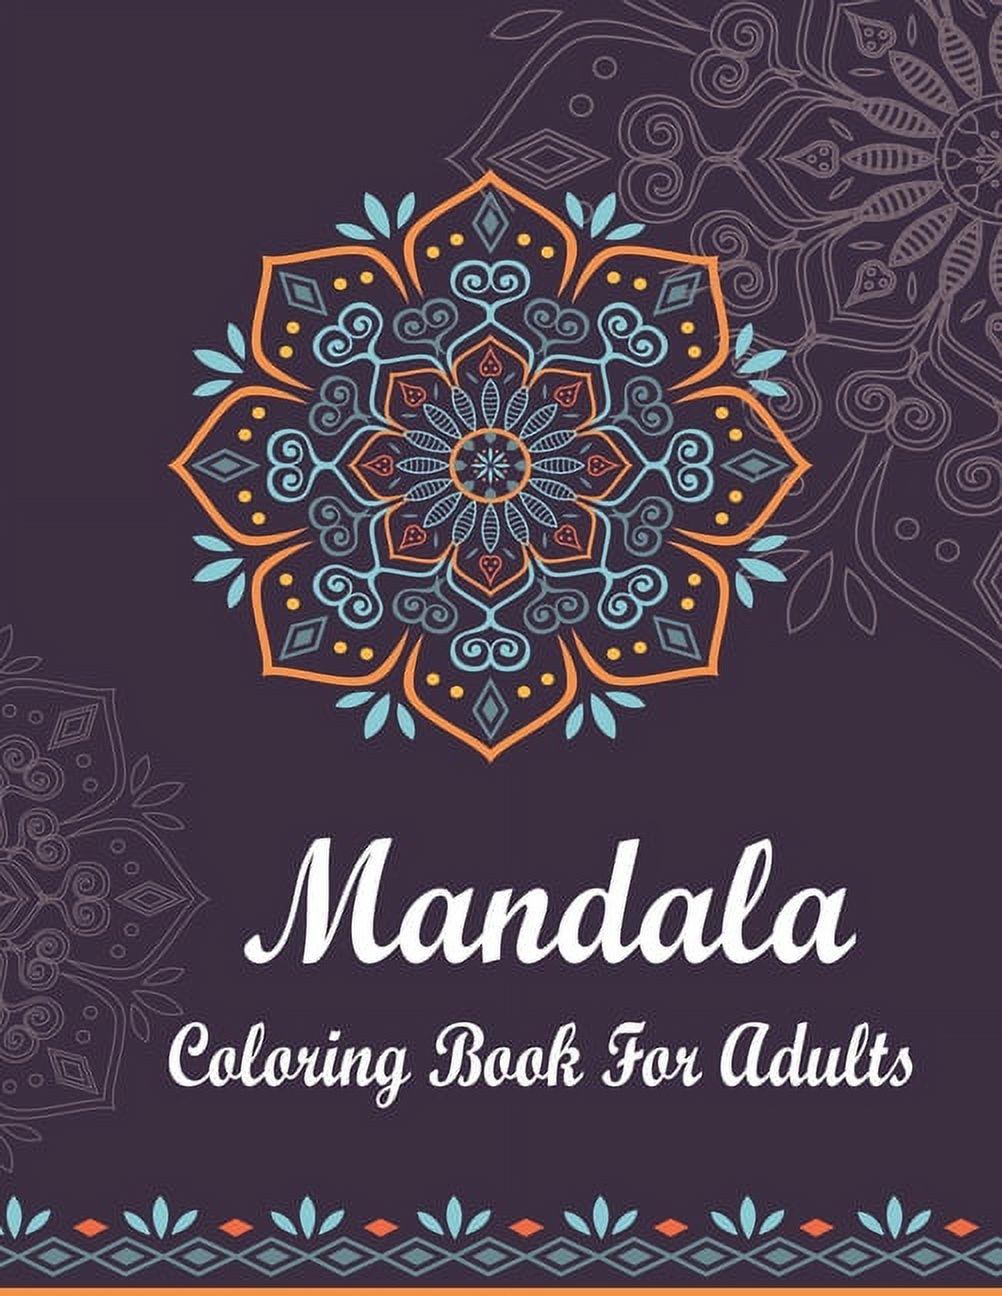 Mandala Coloring Book for Adults: An Adult Coloring Book with Fun